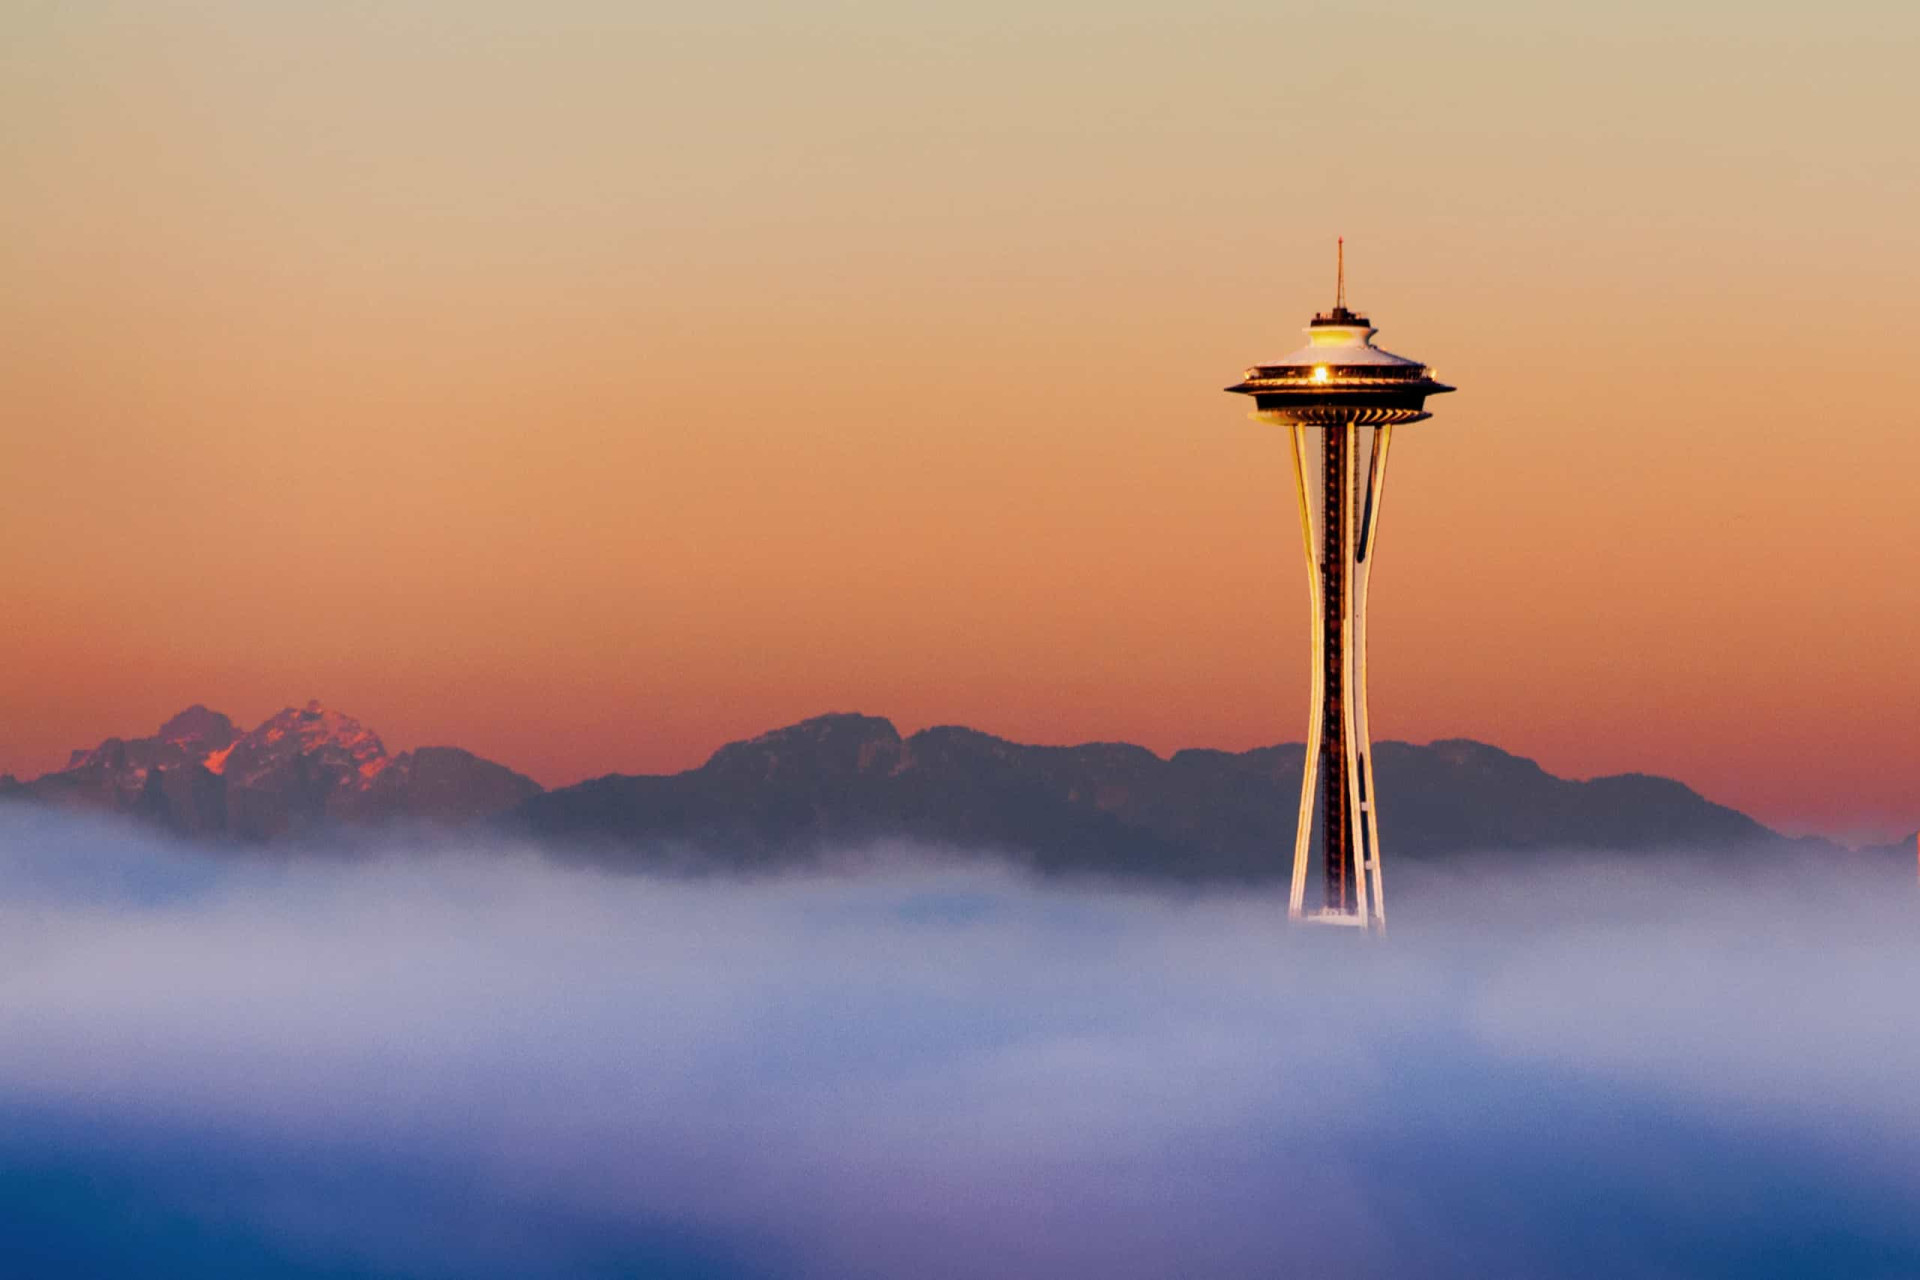 <p>Seattle's celebrated Space Needle peaks above the fog line during a spectacular sunset. Fog often glides in from the Puget Sound and can sometimes obscure the city for days on end.</p><p>You may also like:<a href="https://www.starsinsider.com/n/498296?utm_source=msn.com&utm_medium=display&utm_campaign=referral_description&utm_content=520424v1en-us"> The surprisingly disgusting history of royal palaces</a></p>